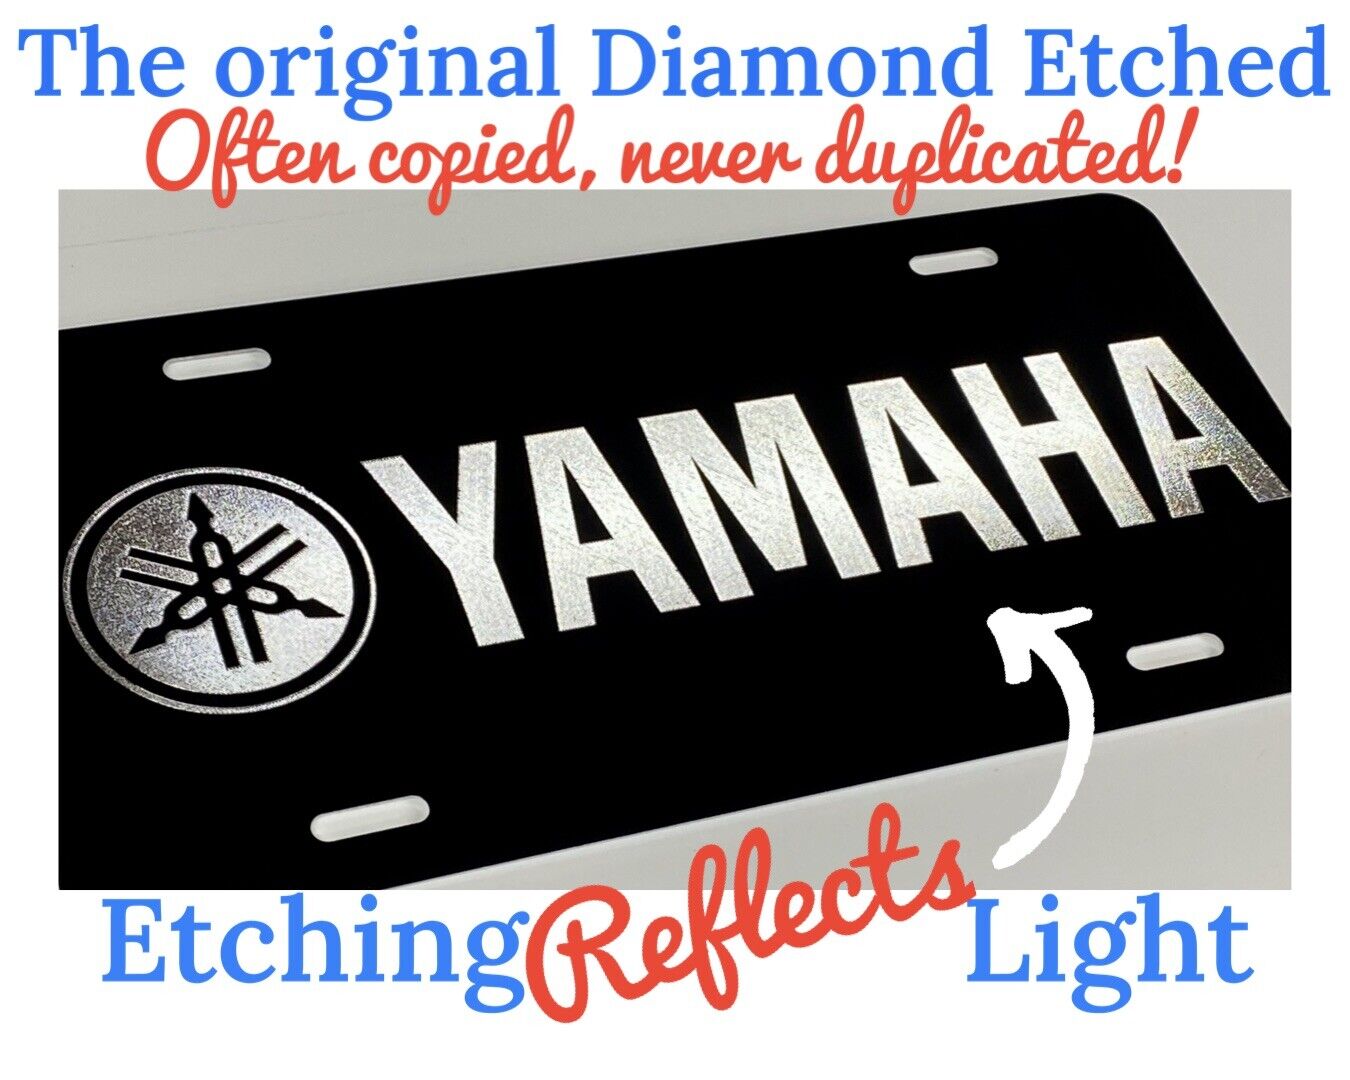 Engraved NOT Lasered YAMAHA Car Tag Diamond Etched Metal Front License Plate